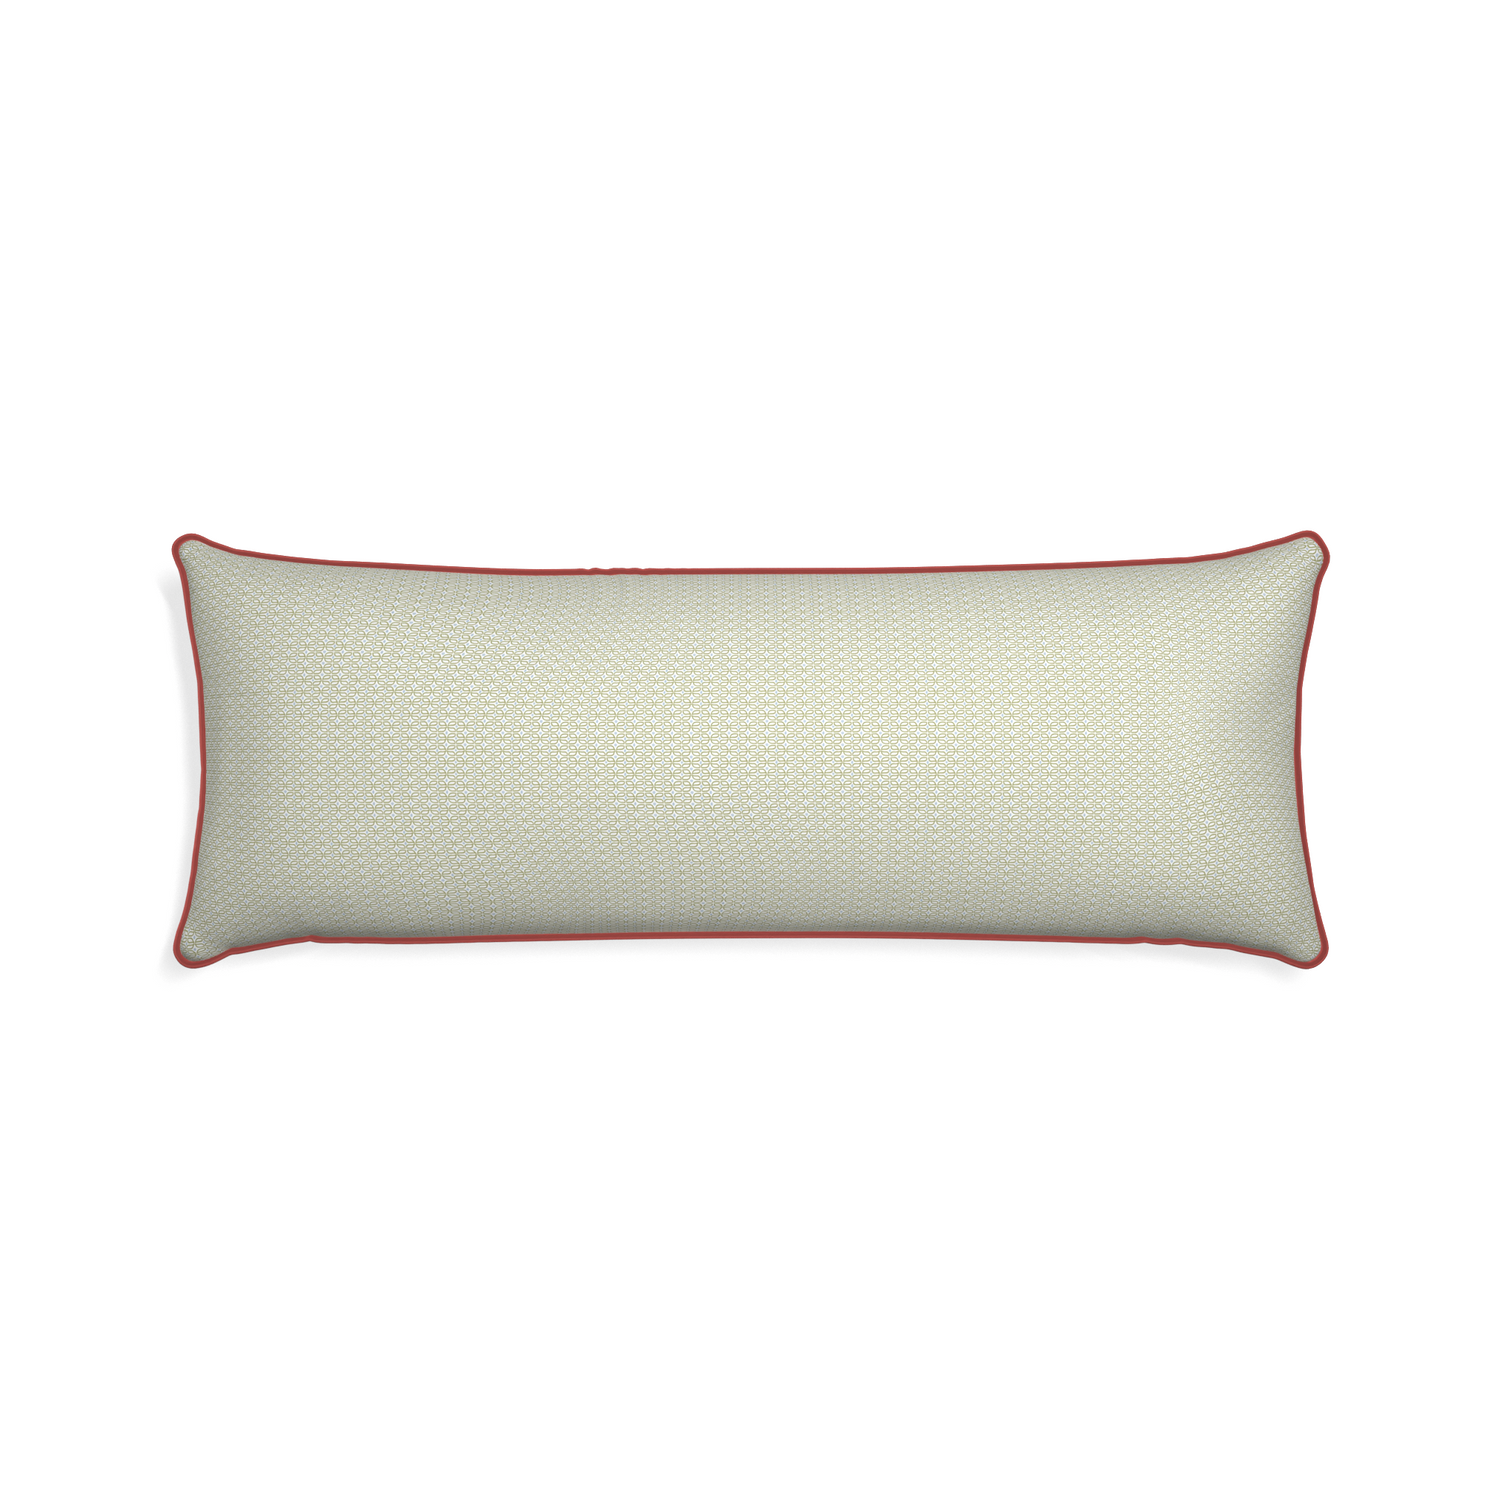 Xl-lumbar loomi moss custom moss green geometricpillow with c piping on white background